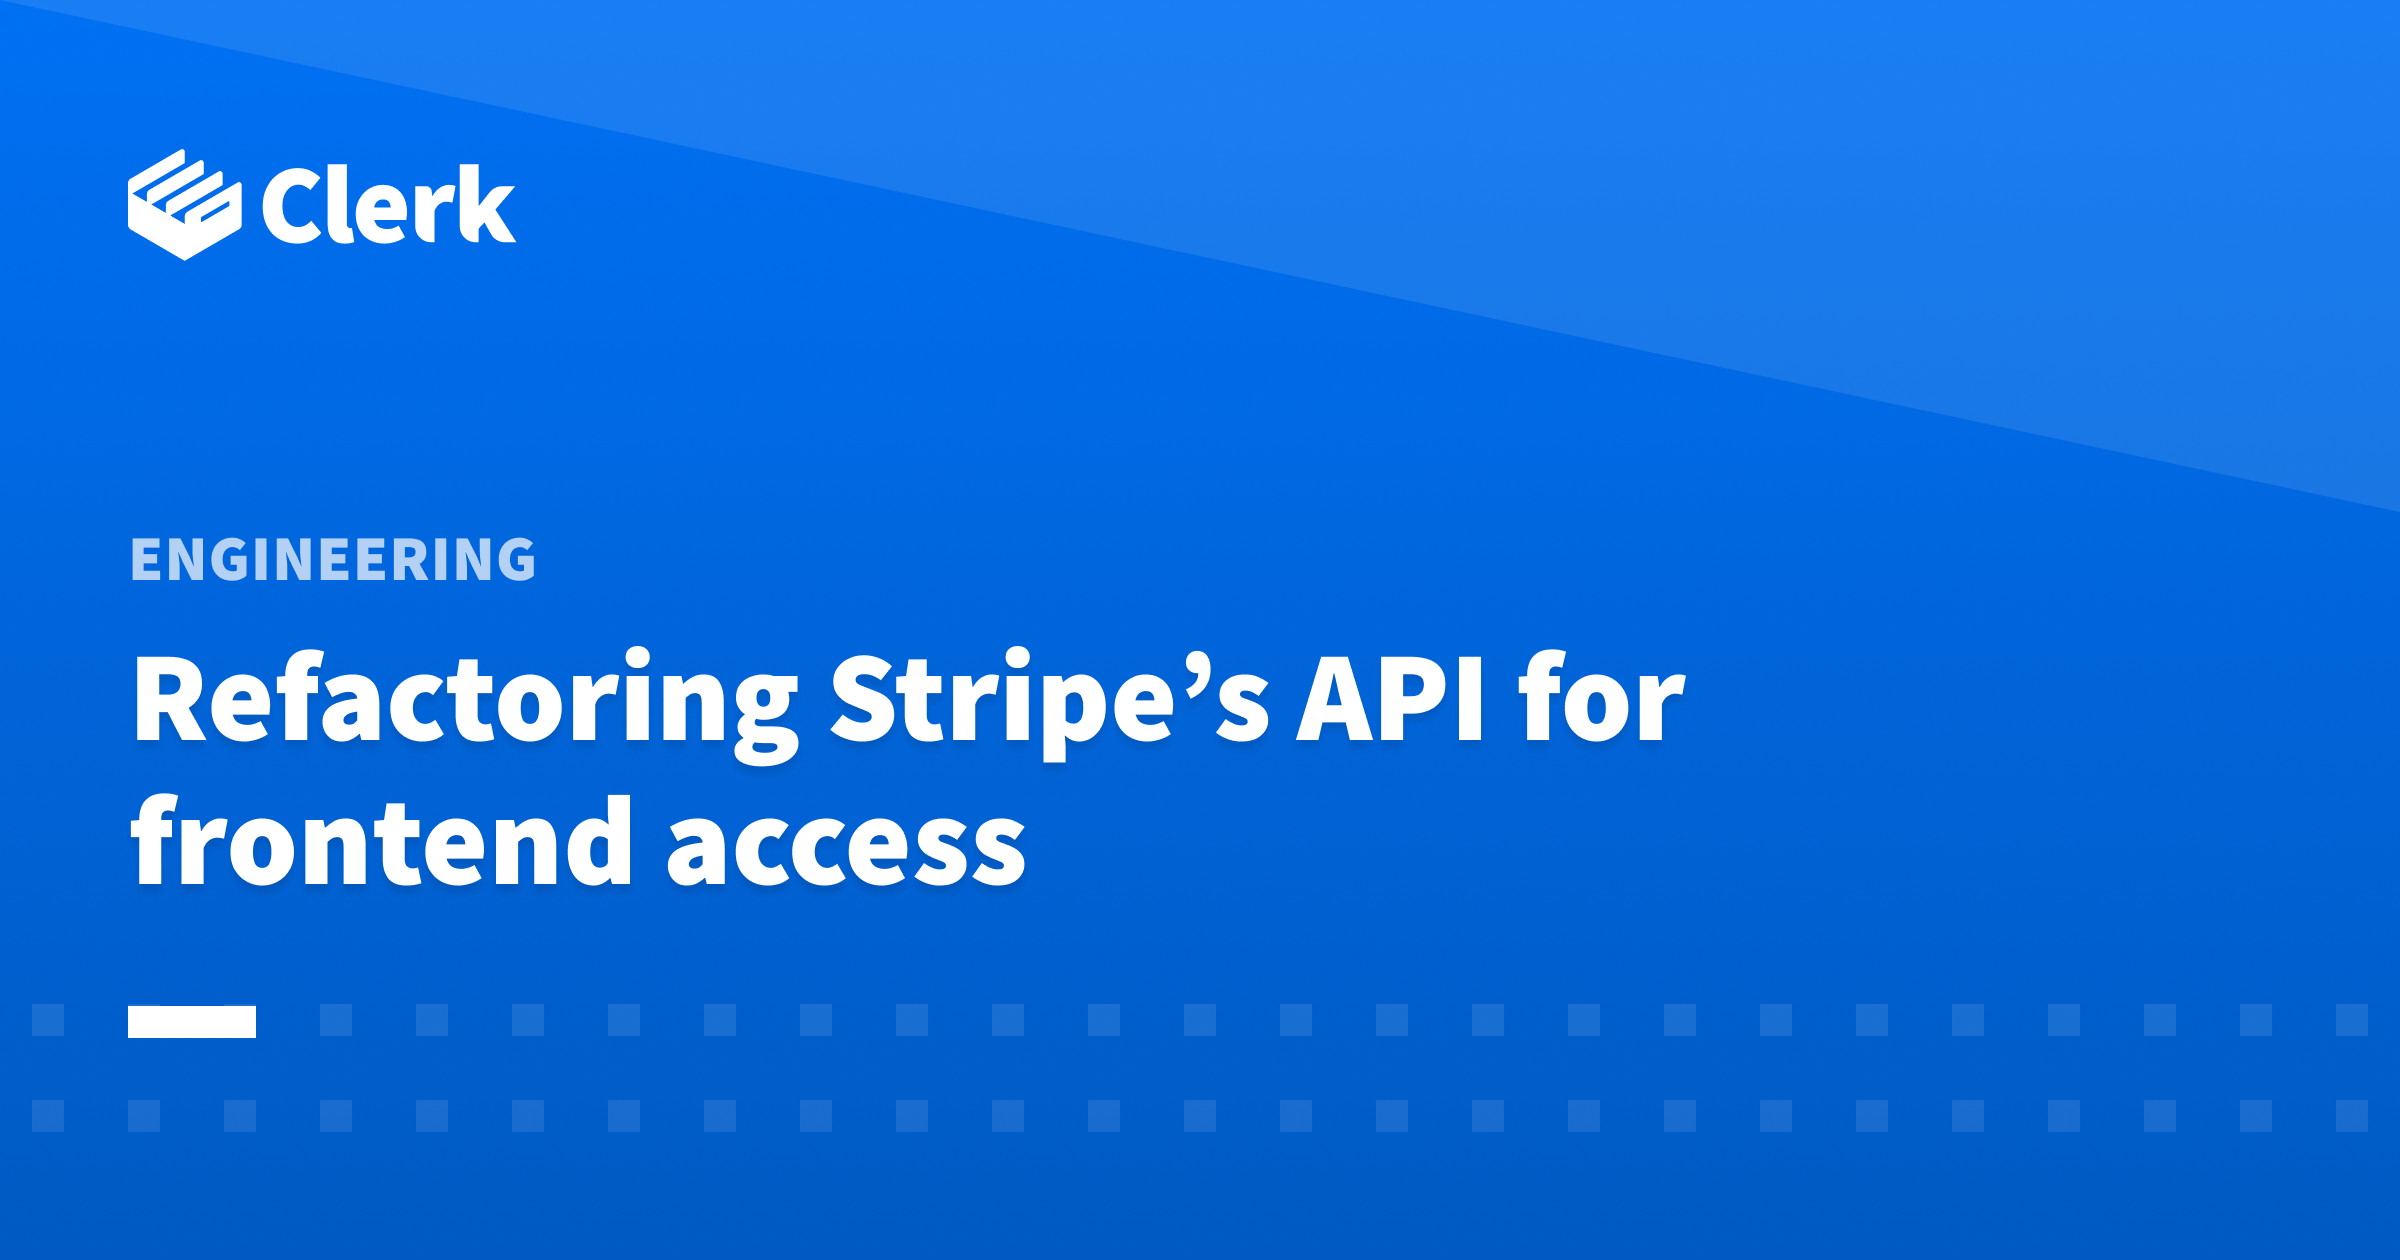 Refactoring Stripe's API for frontend access